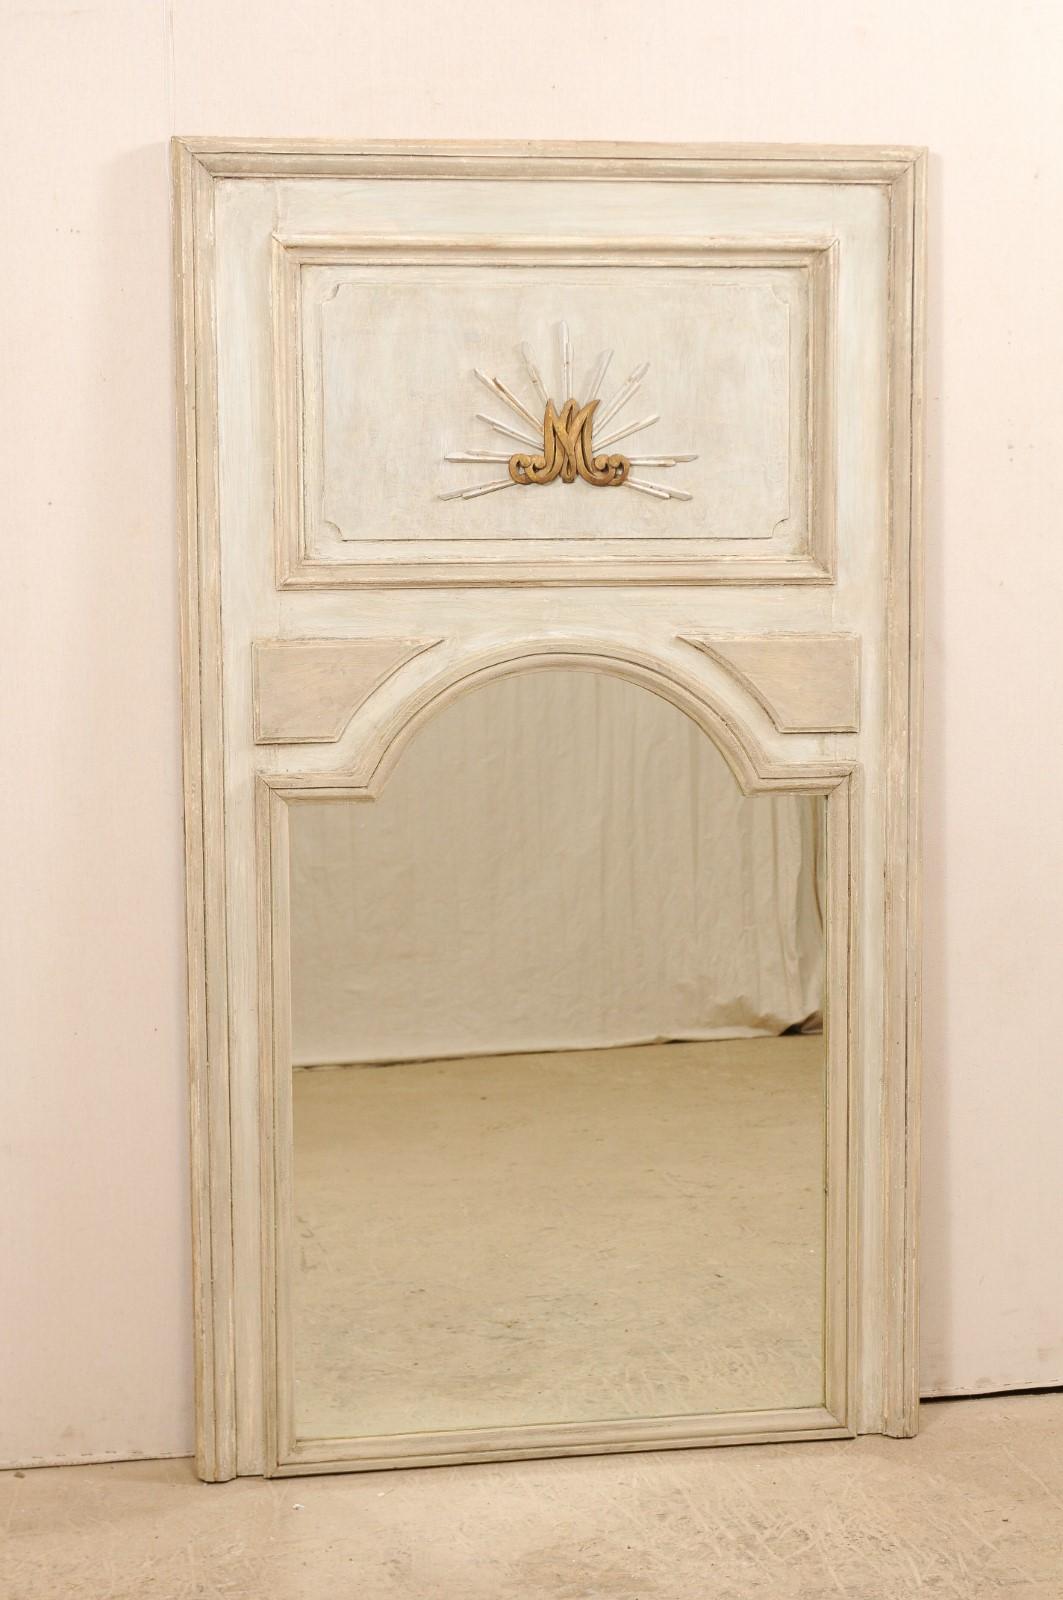 A tall French painted wood trumeau mirror from the 19th century. This antique mirror from France features the tall rectangular-shape, with typical trumeau design of wooden plaque-style top, above a glass mirror, with arch-shaped top. The upper panel